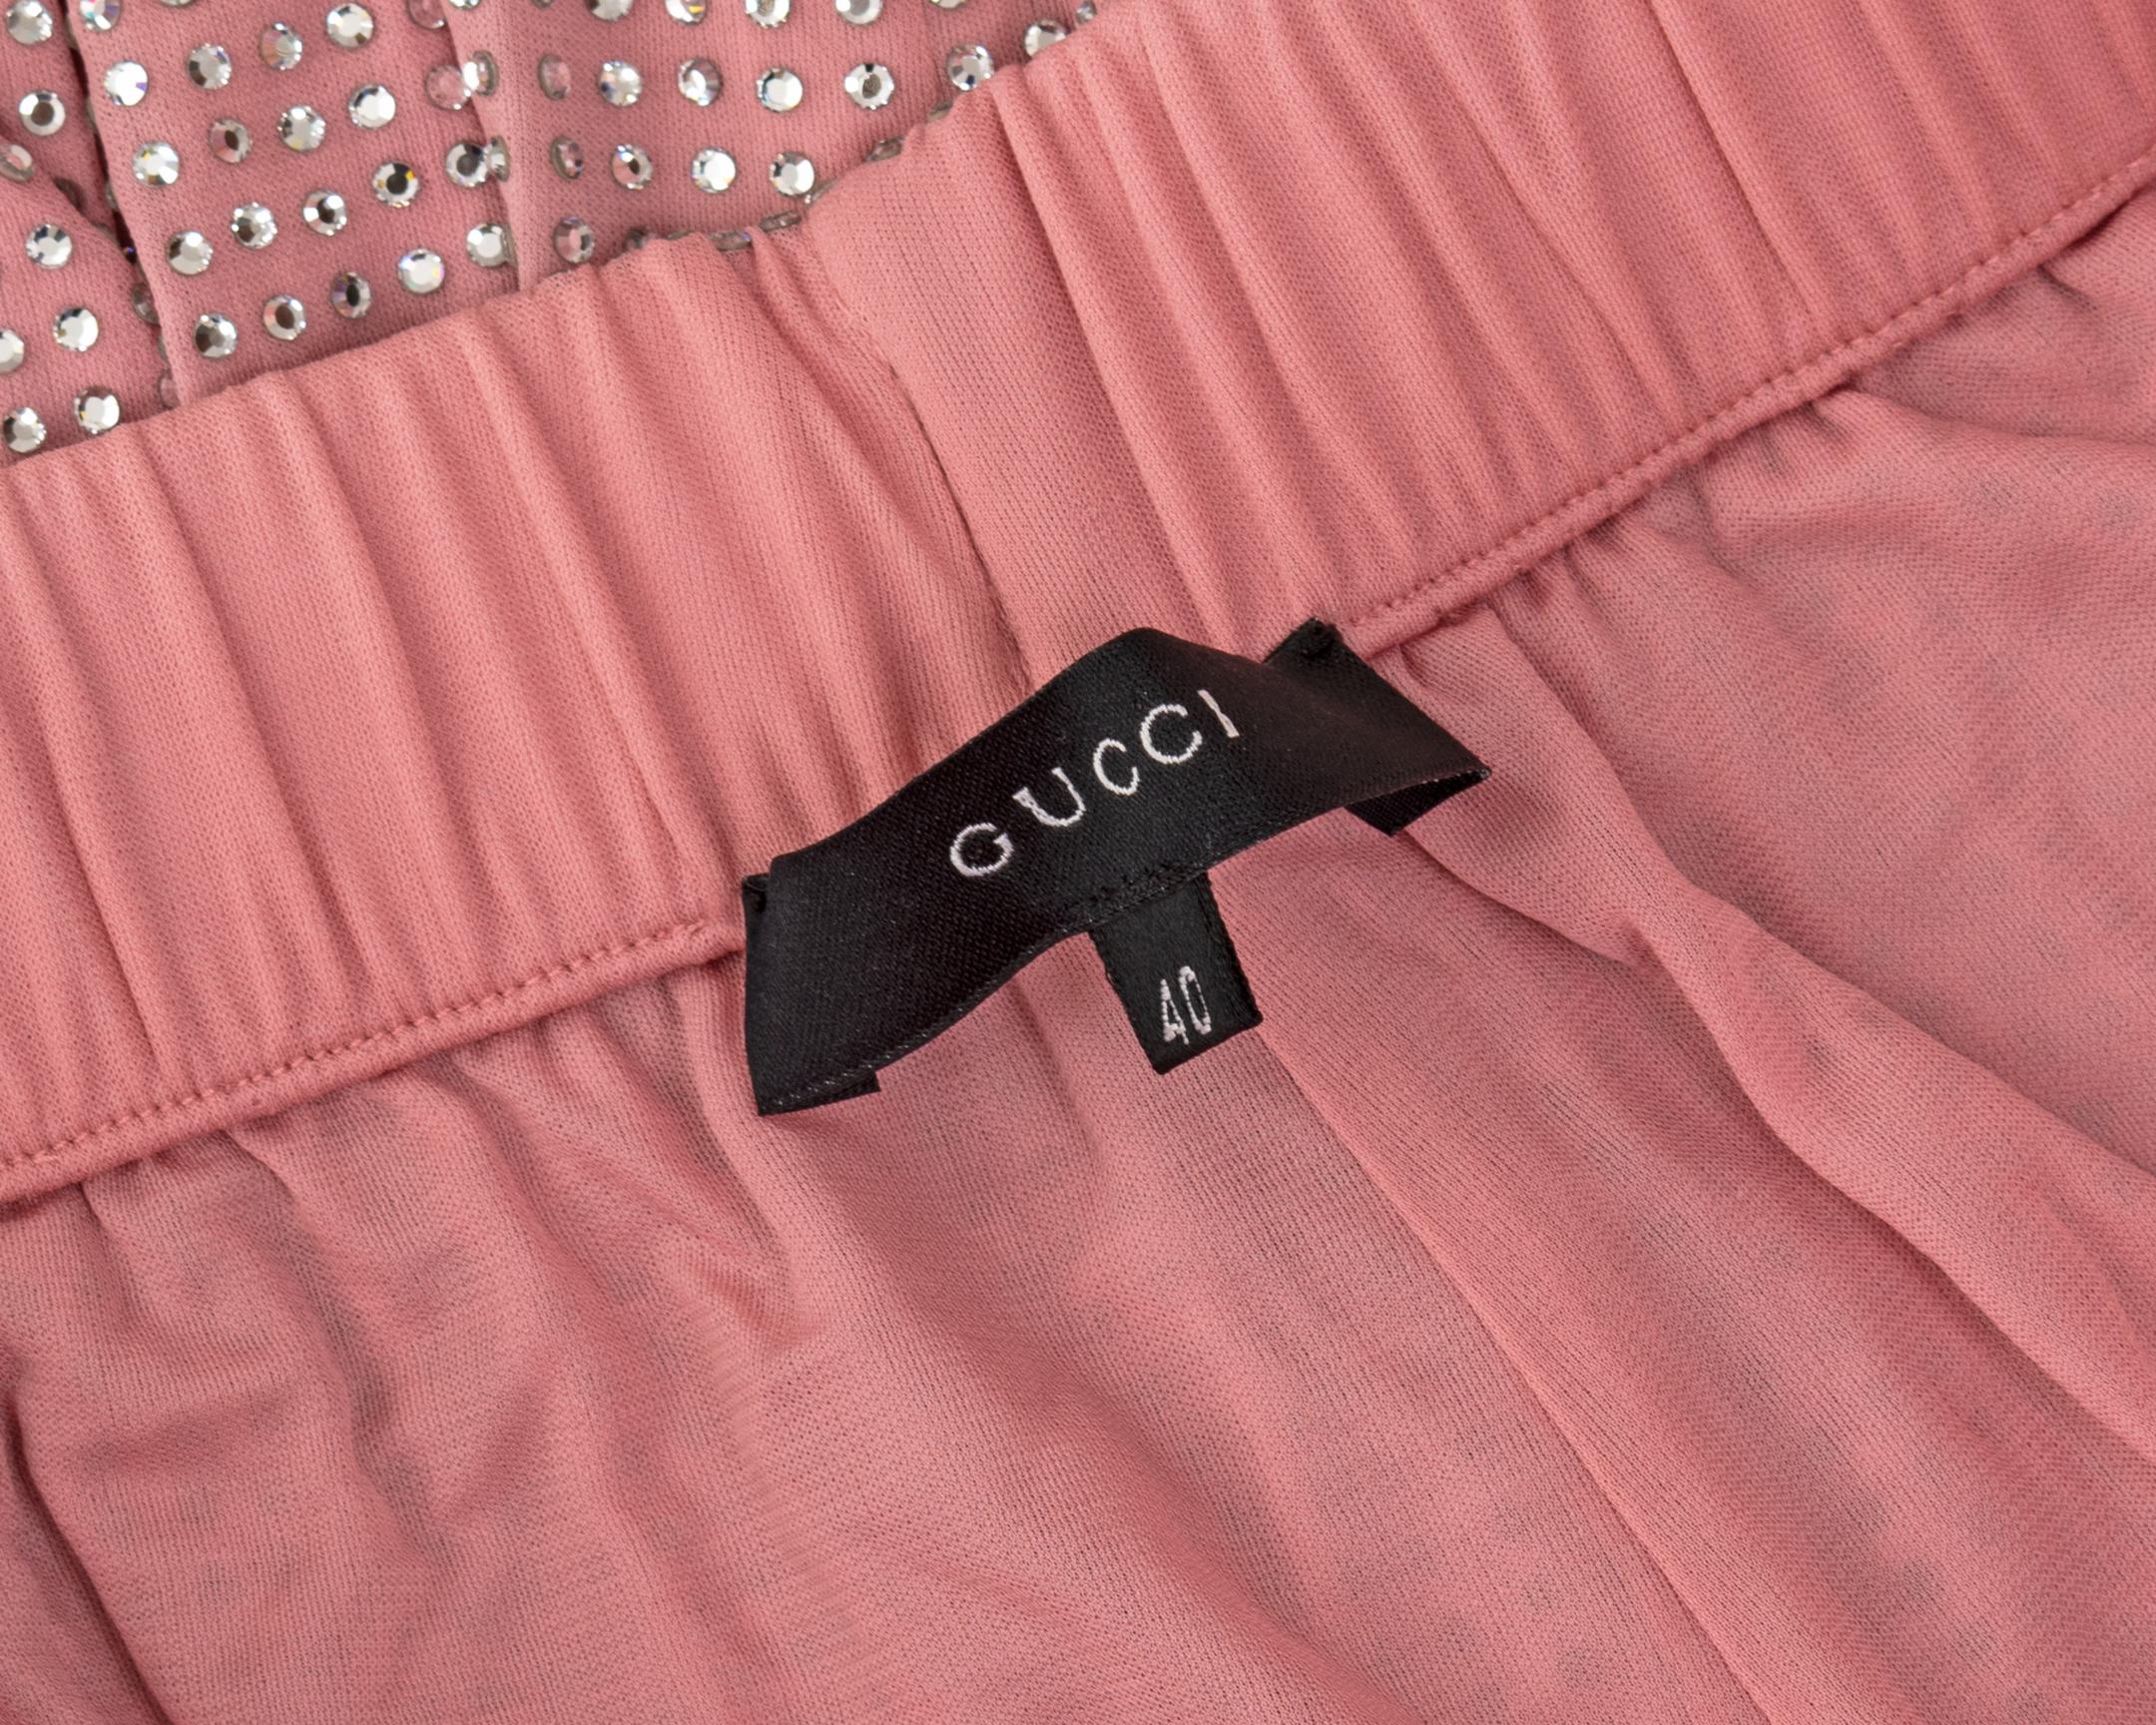 Gucci by Tom Ford pink crystal beaded low rise evening pants, ss 2000 For Sale 7